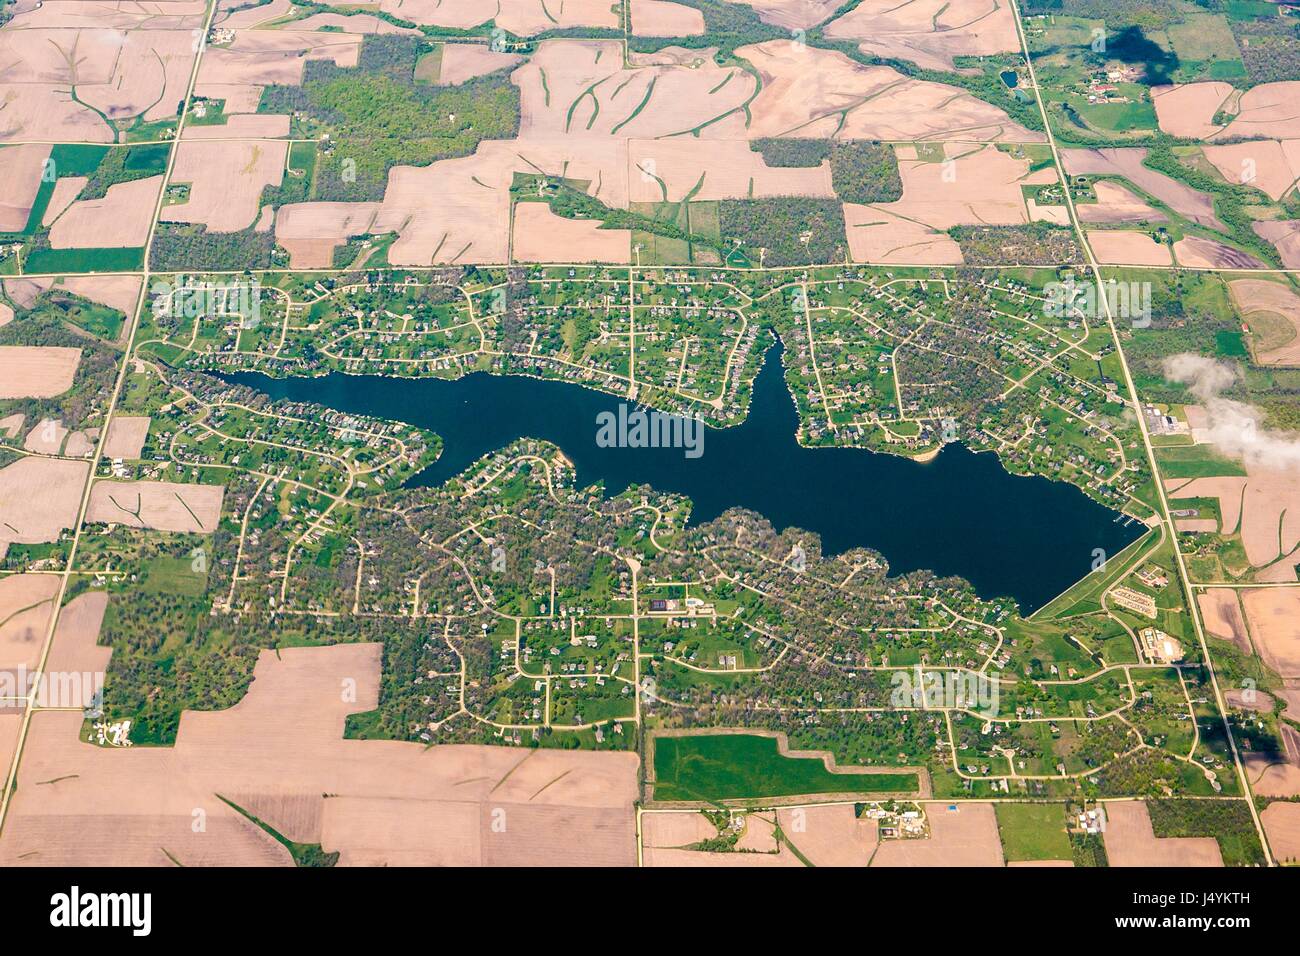 Residential development surrounded by farm fields in spring viewed from 10,000 feet May 6, 2017 in Northern Illinois. Stock Photo